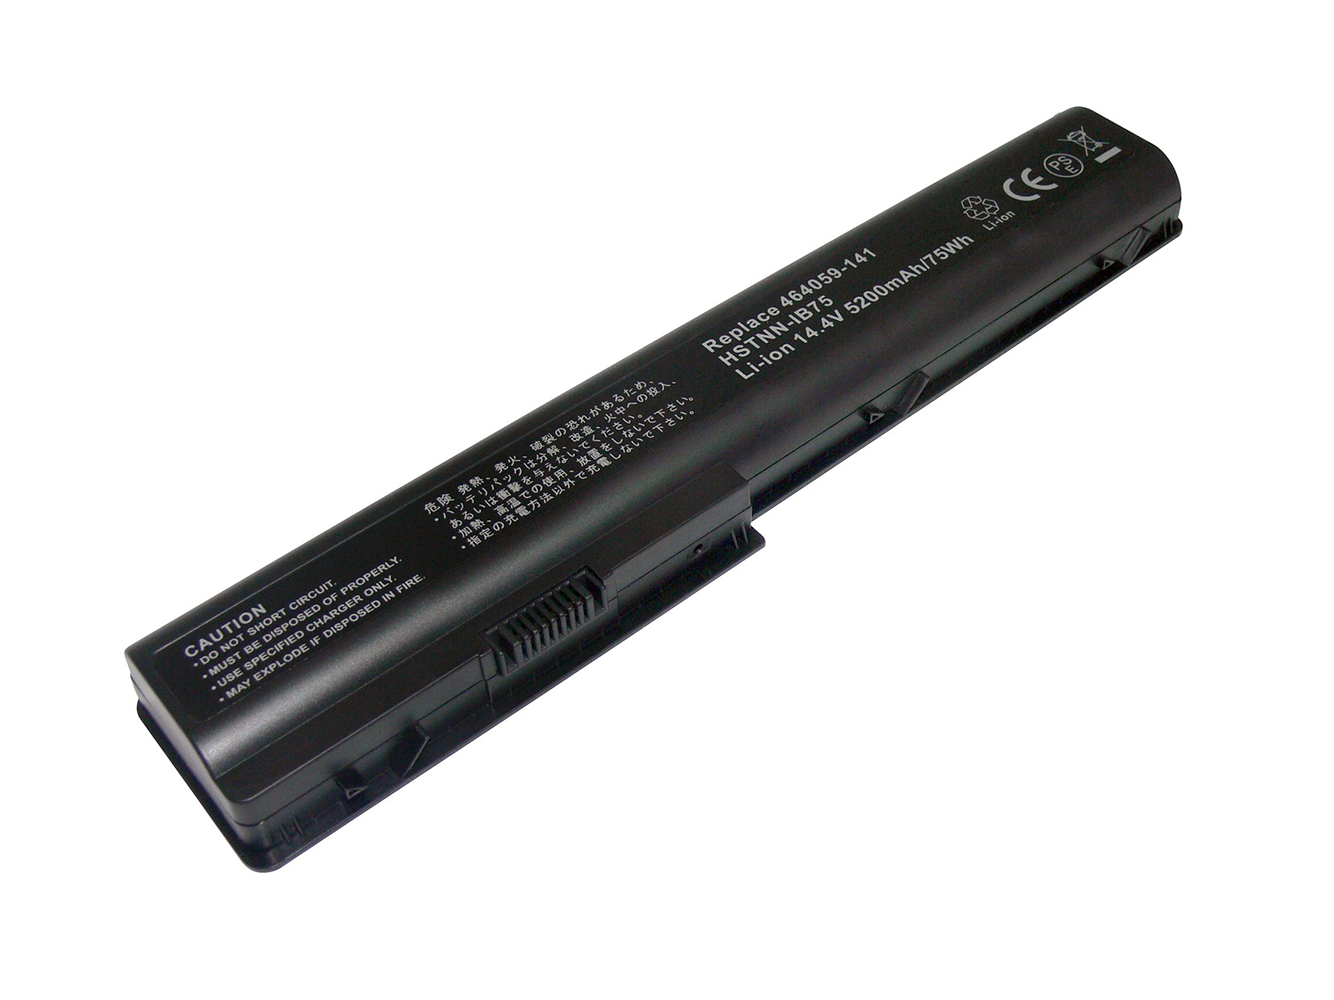 464059-121, 464059-141 replacement Laptop Battery for HP HDX X18-1000, HDX X18-1100